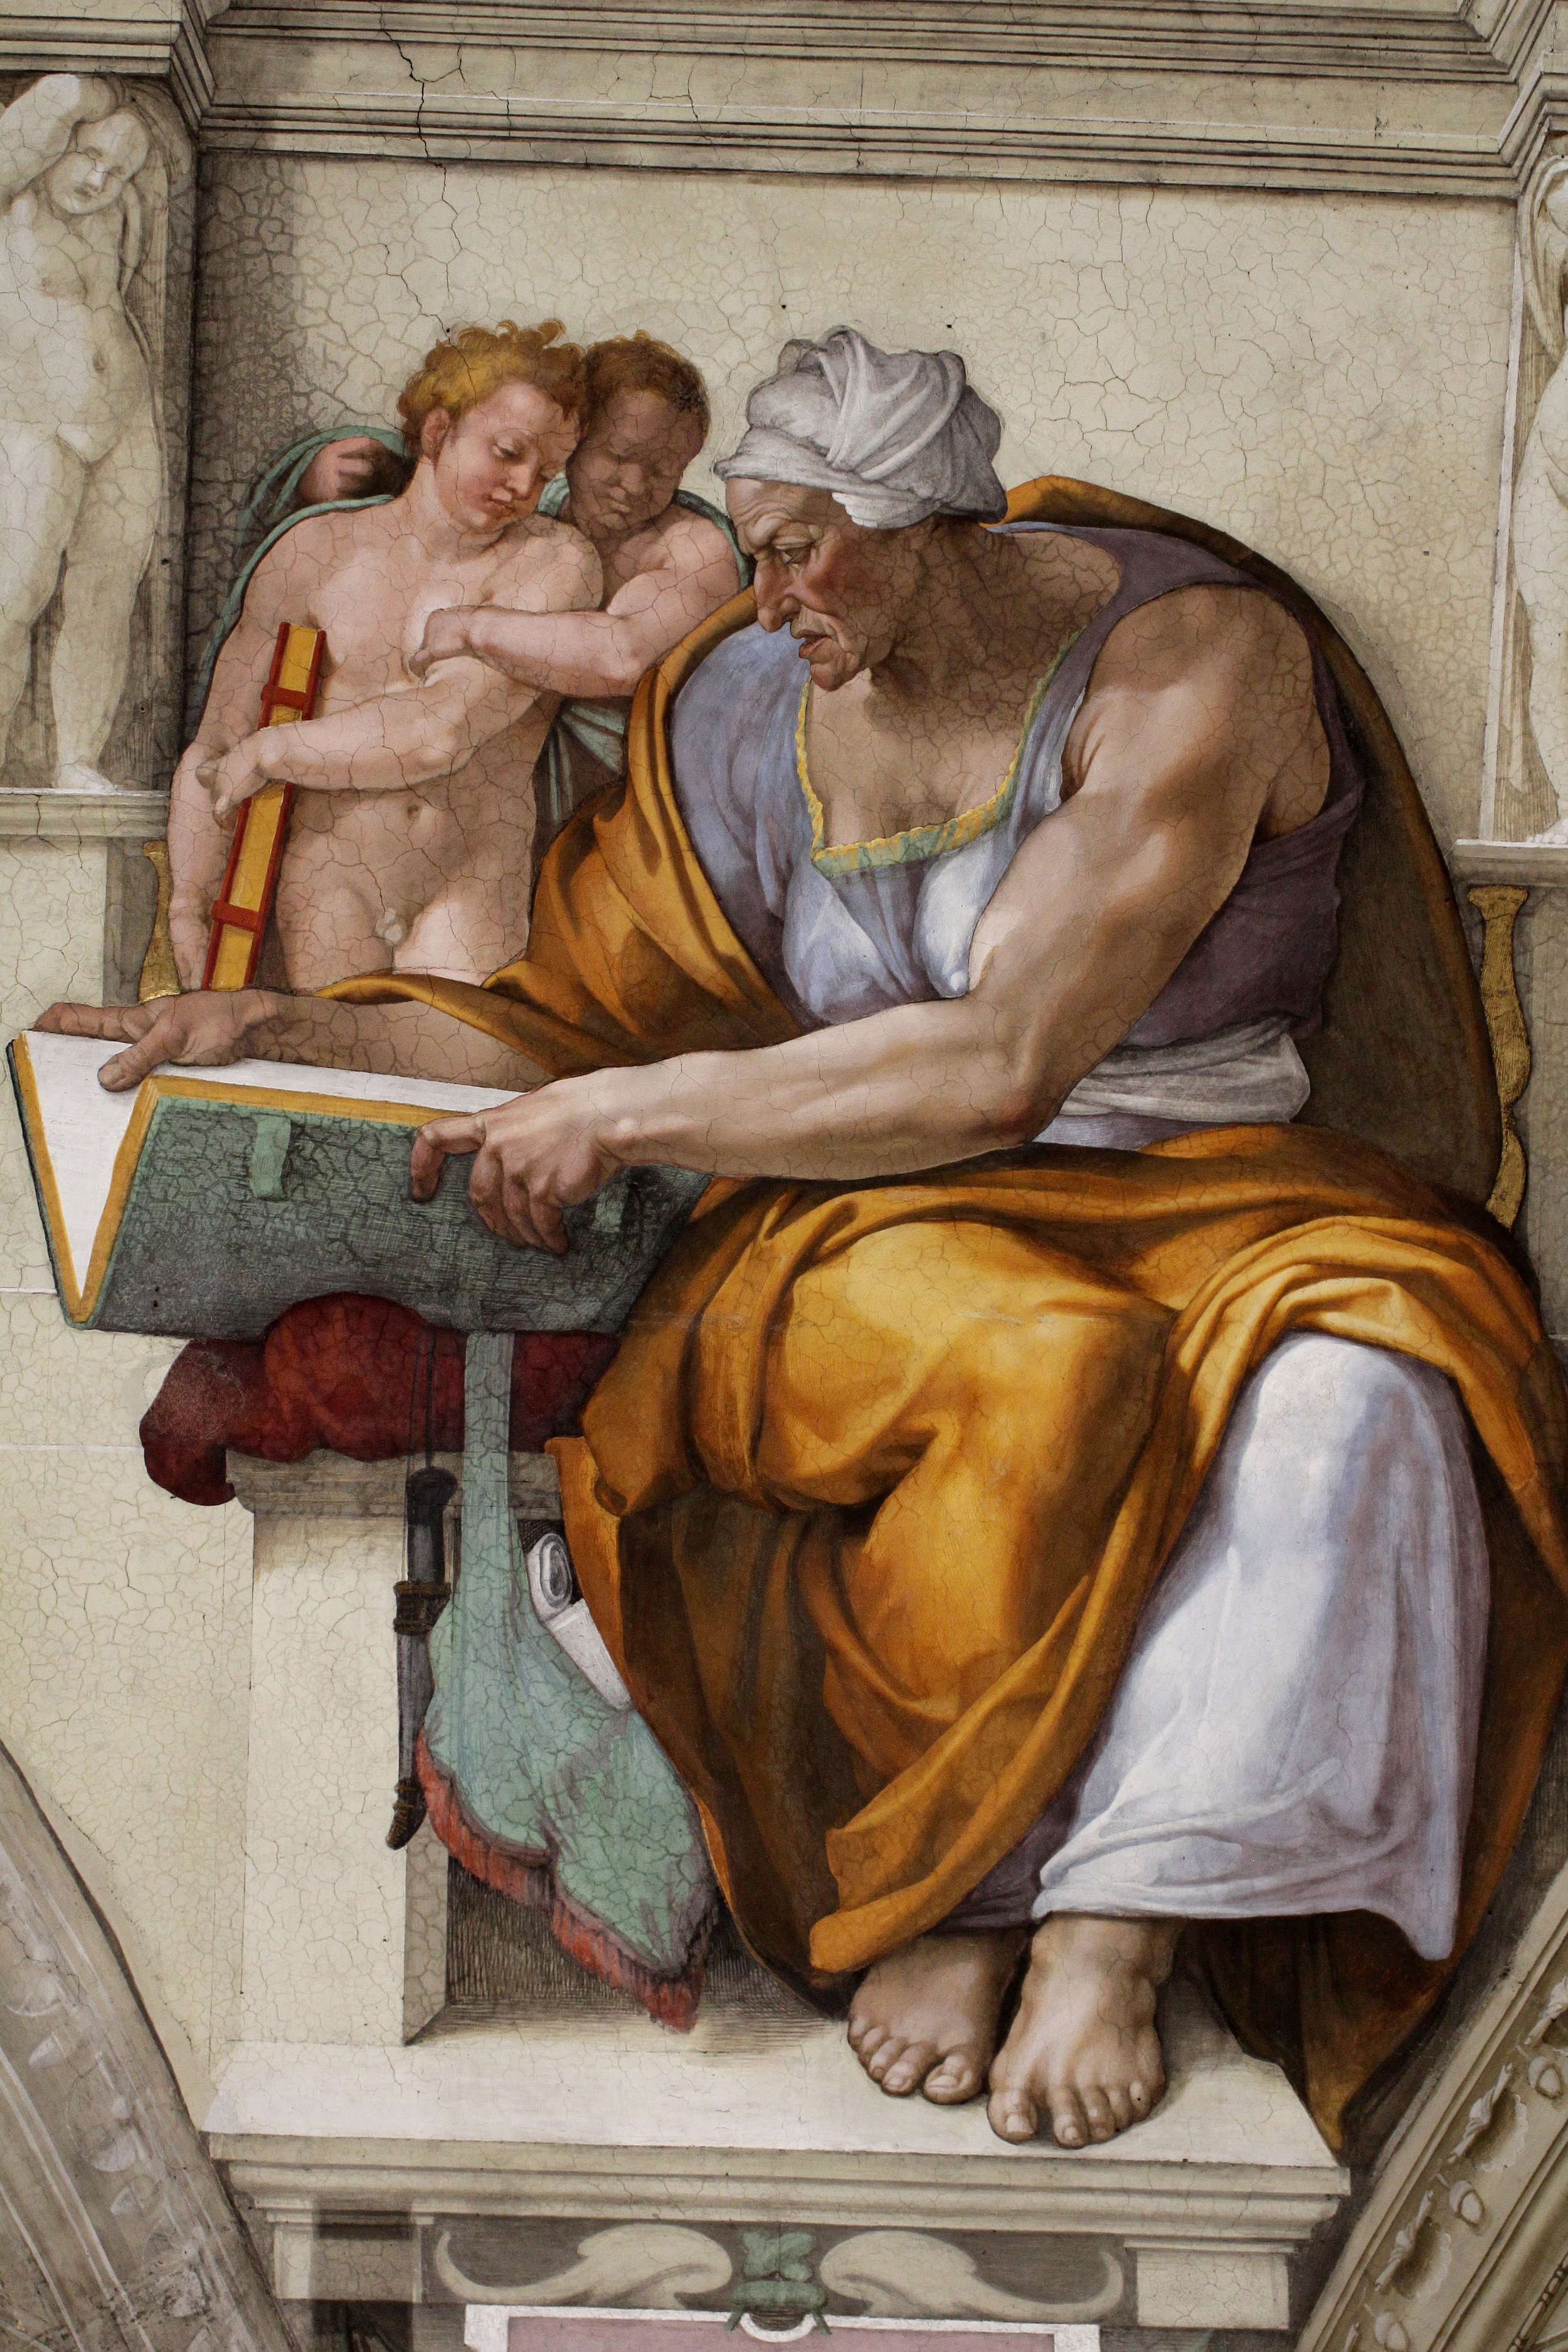 Michelangelo, Cumaen Sibyl from the Sistine Chapel Ceiling, painted 1508-1512